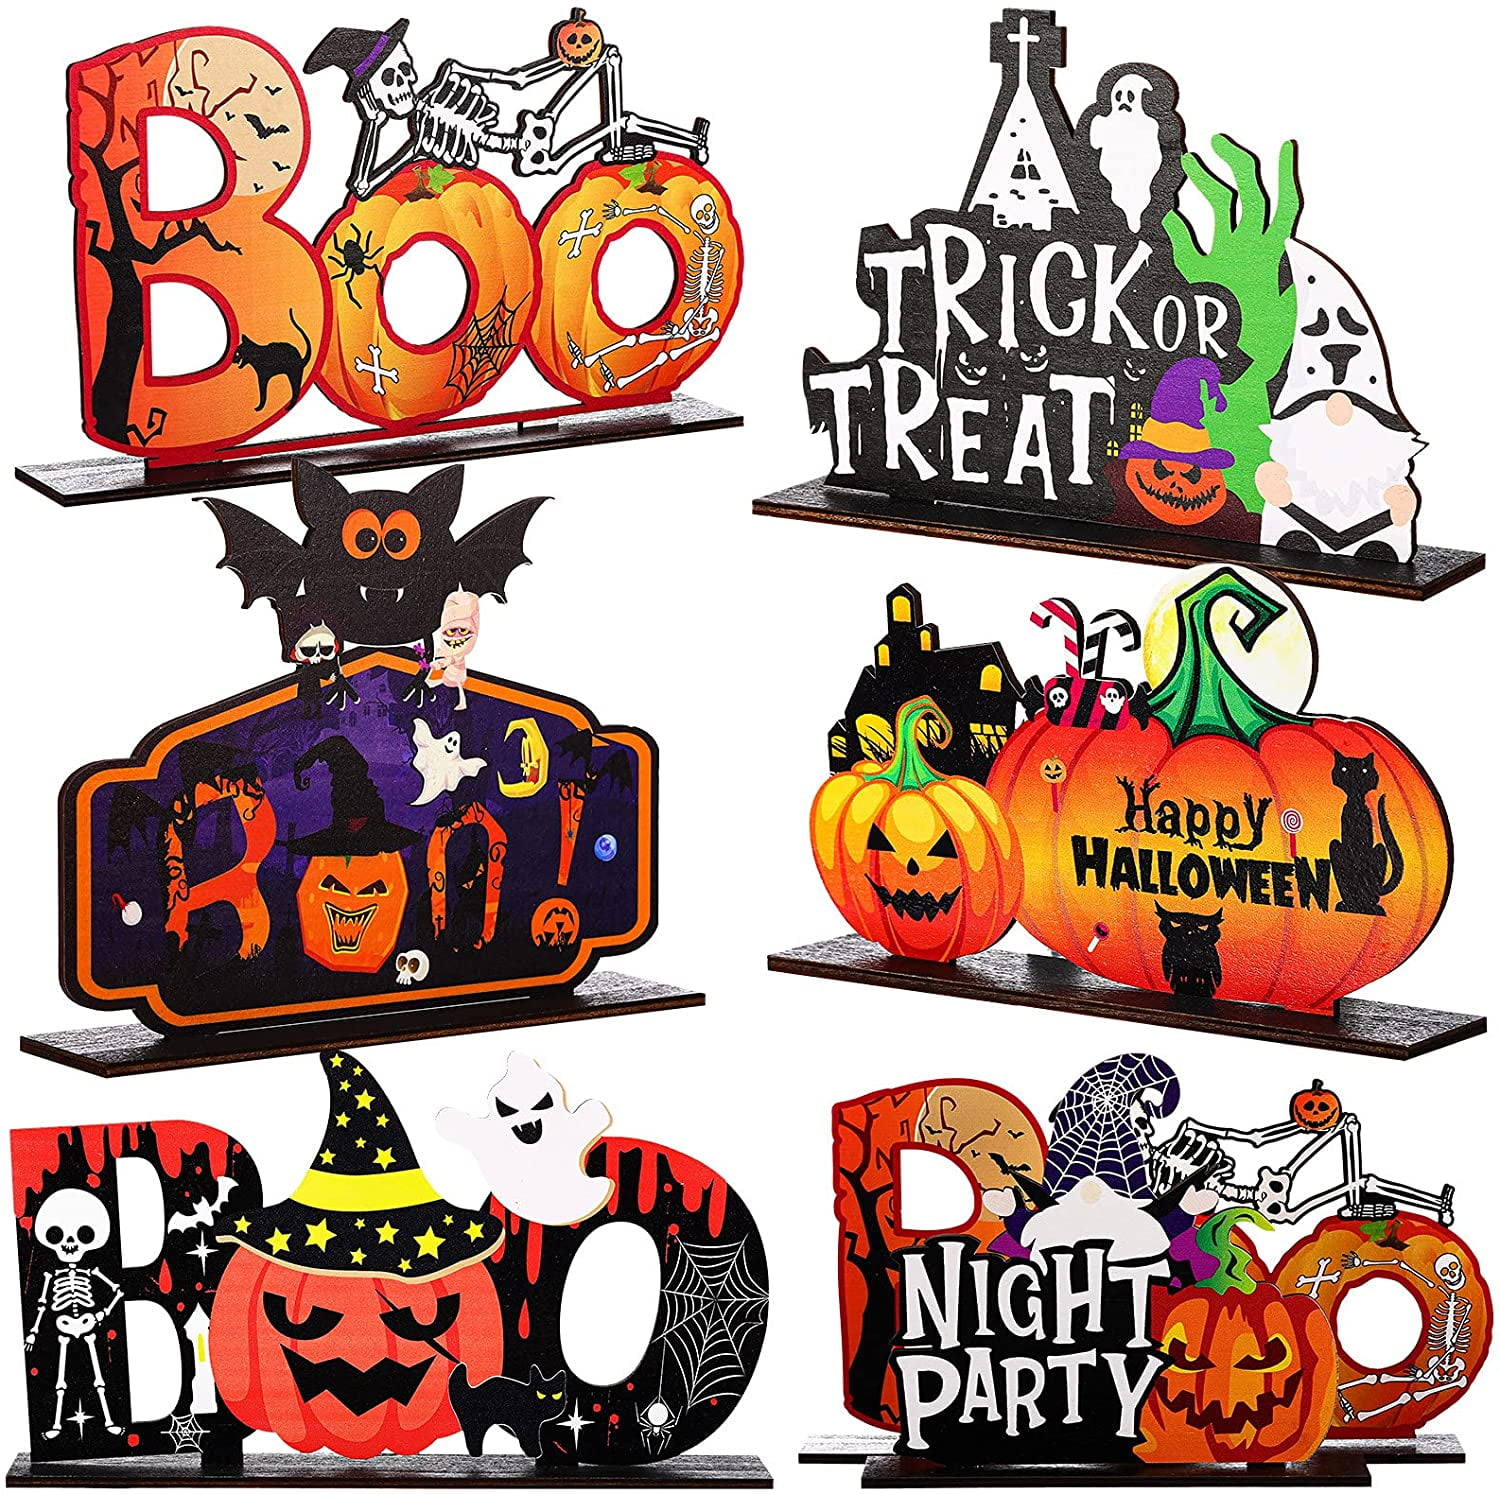 Table Toppers Wooden Standing Pumpkin and Boo Sign Topways Halloween Wooden Centerpiece Decorations Spooky Cat Table Centerpieces for Decoration Halloween Party Office Bar Room